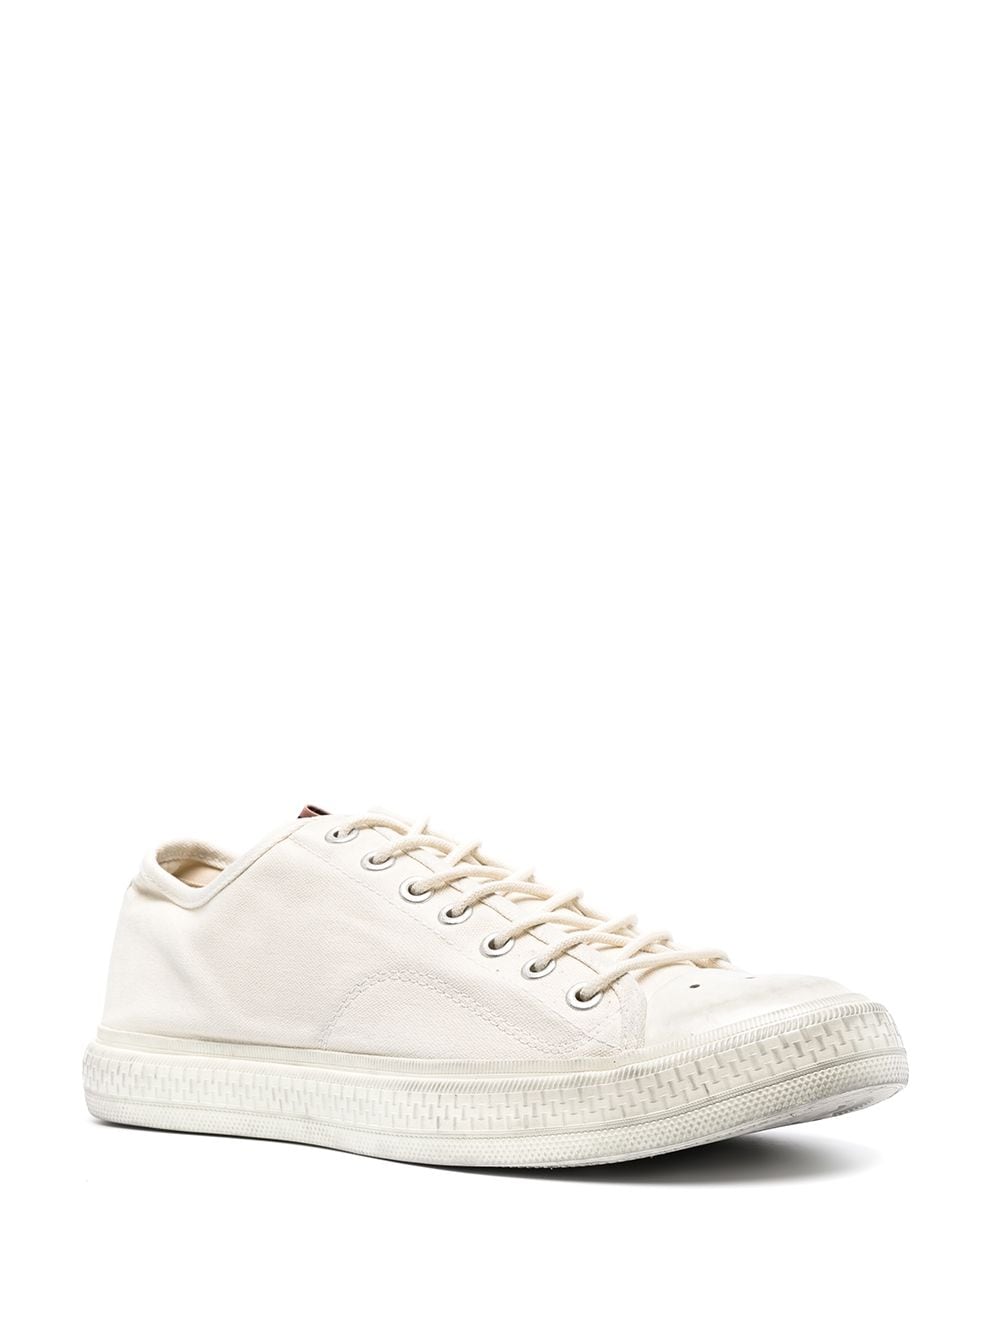 PERFORATED CANVAS SNEAKERS